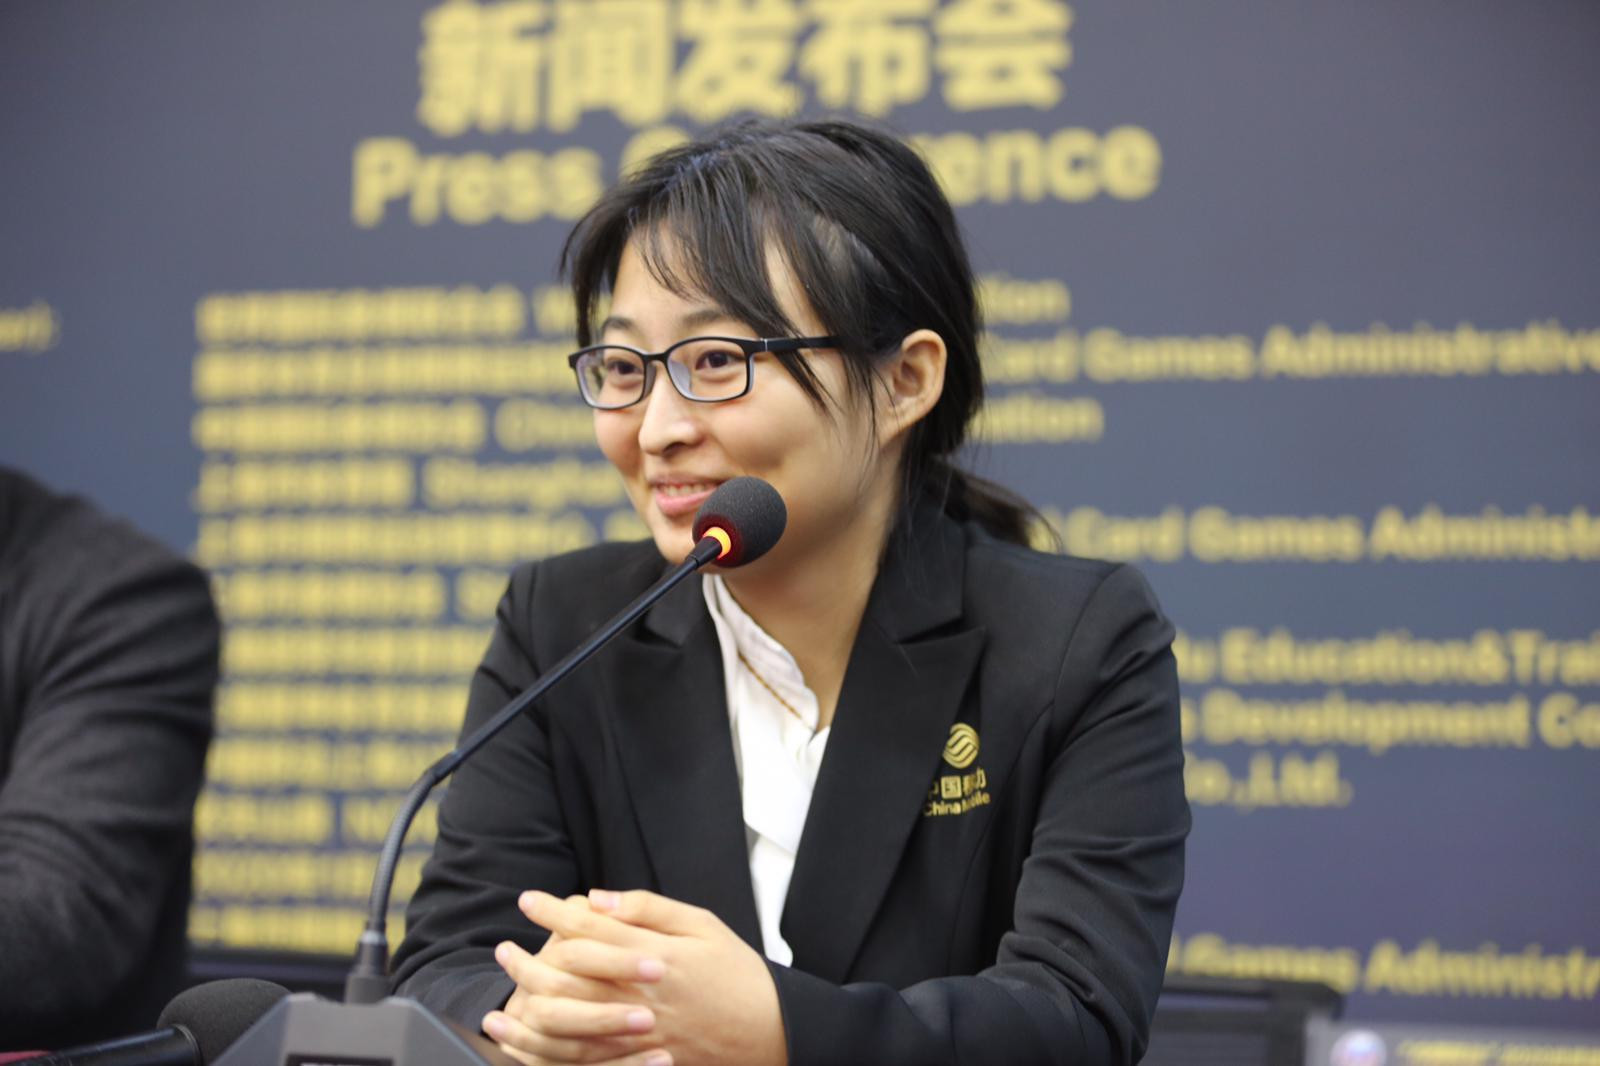  Ju Wenjun claimed the first victory of this year's Women's World Chess Championship ©FIDE